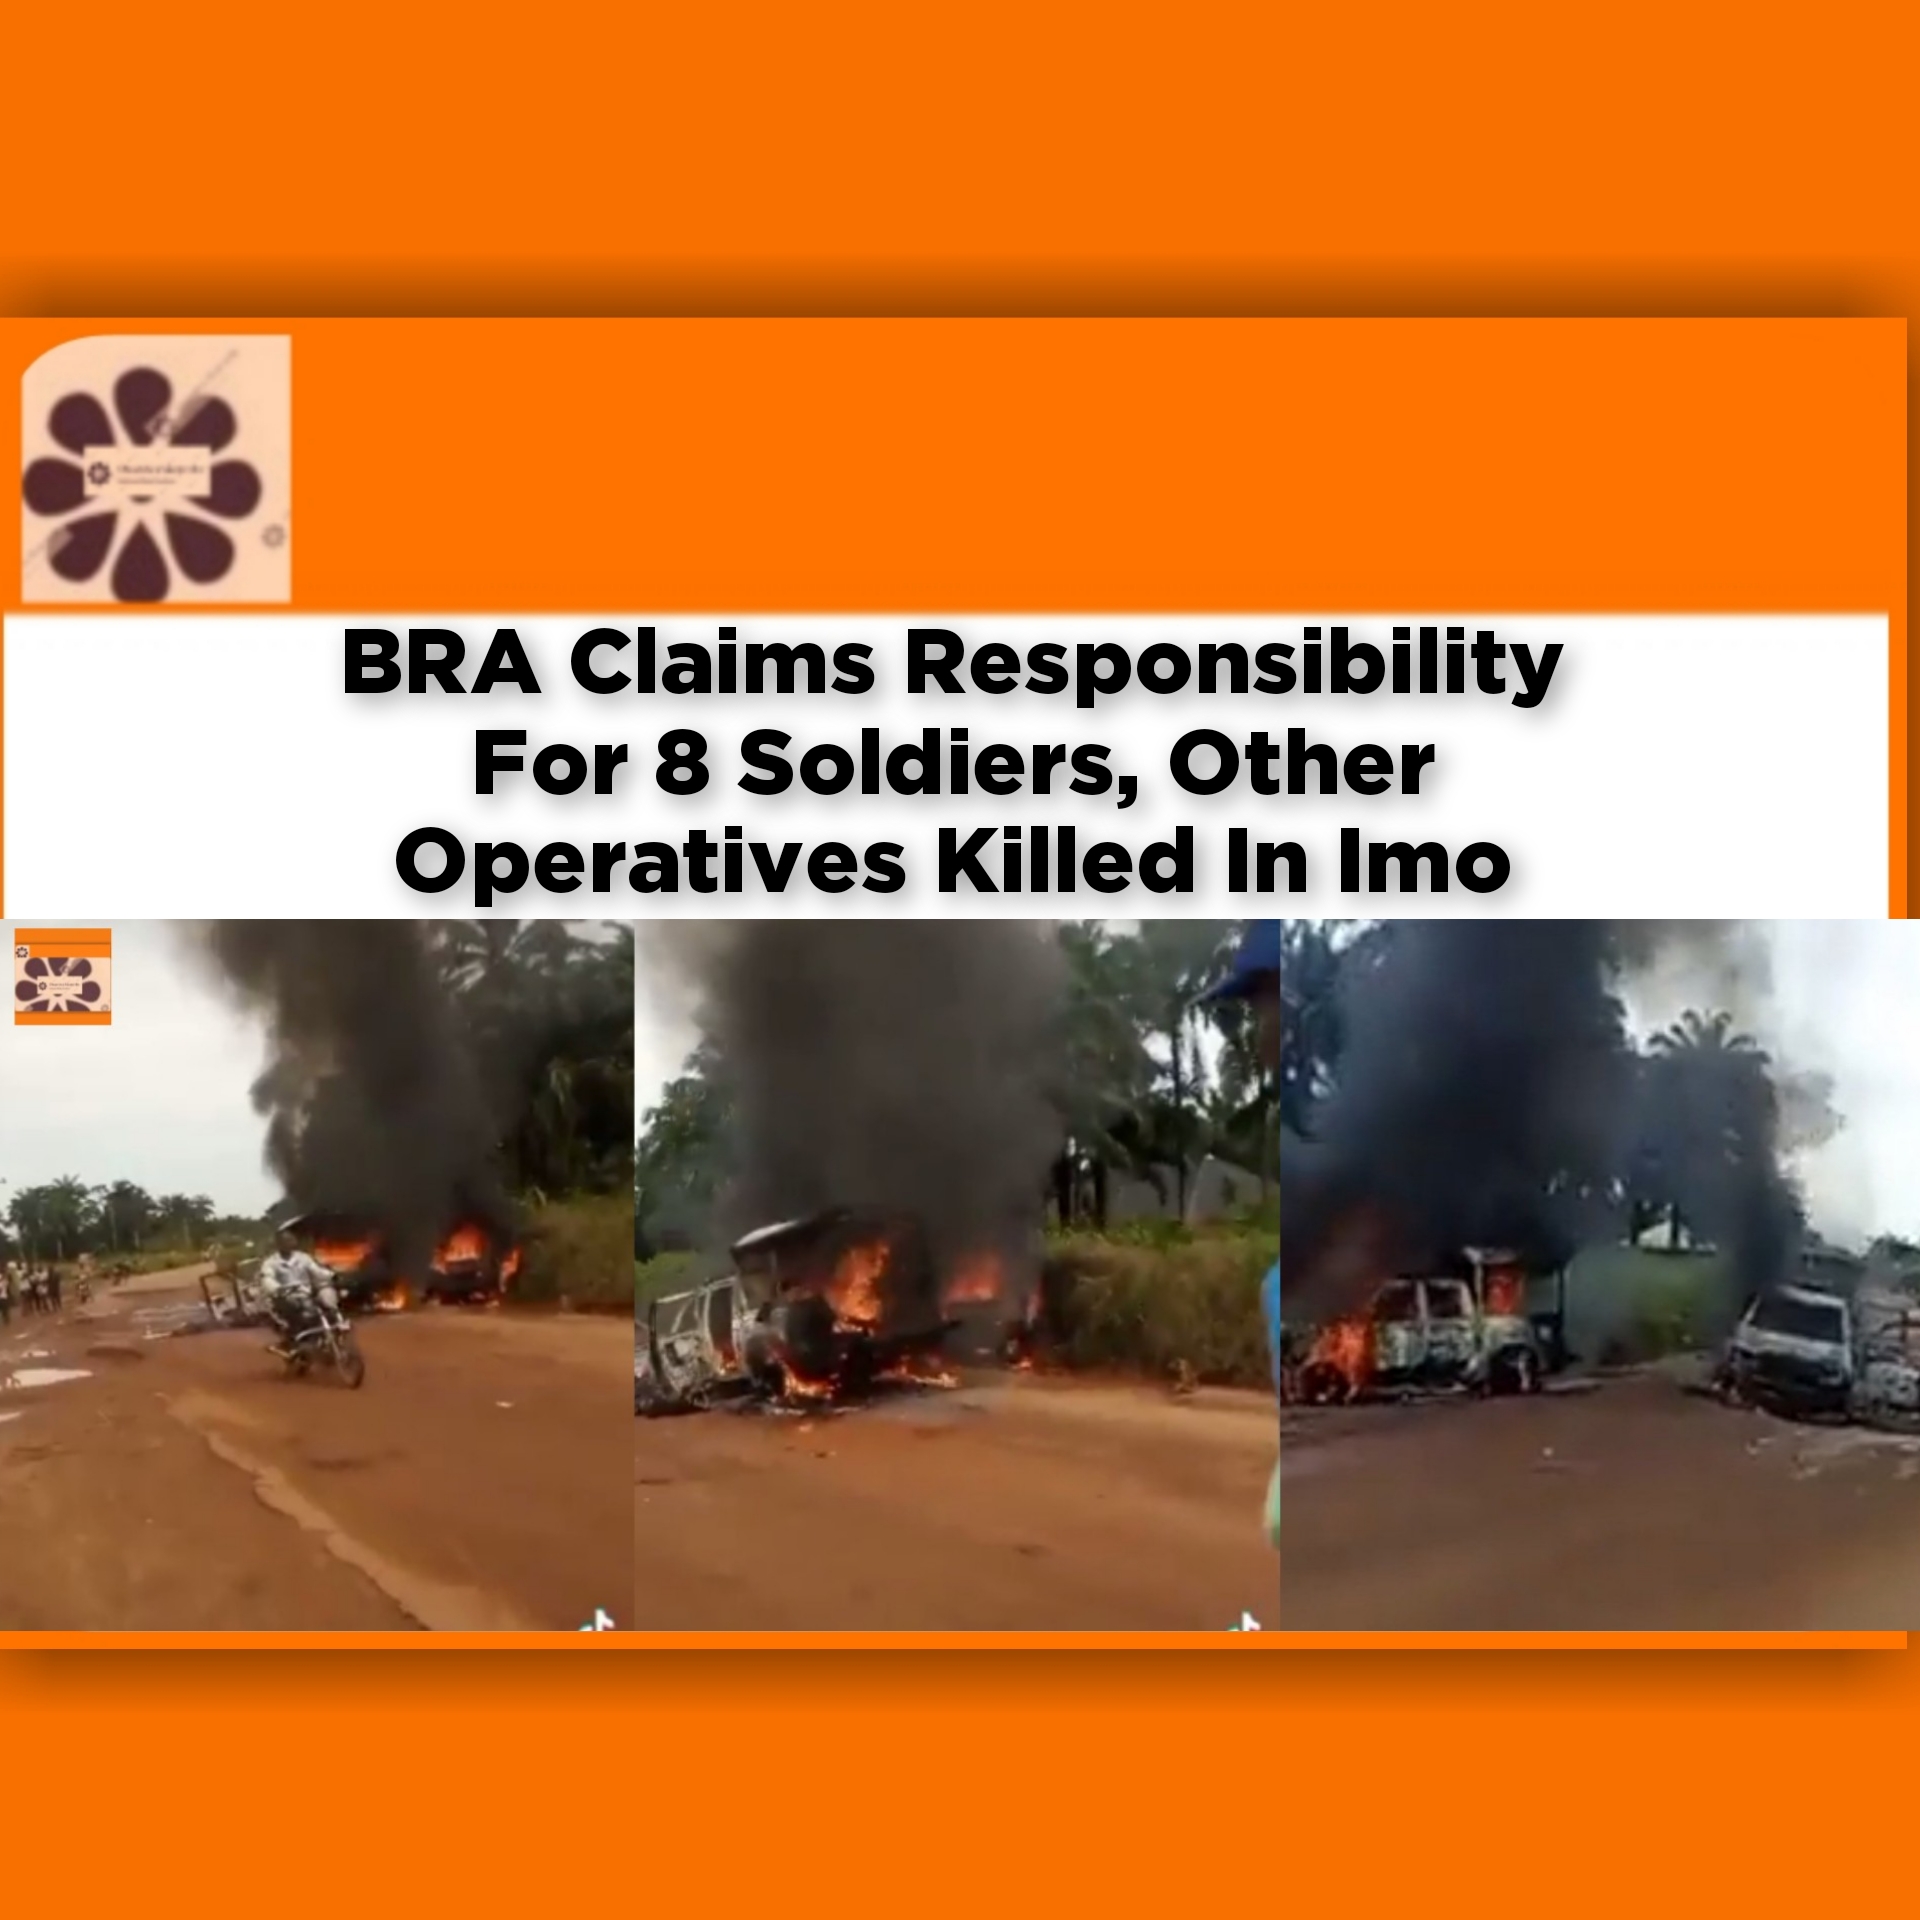 BRA Claims Responsibility For 8 Soldiers, Other Operatives Killed In Imo ~ OsazuwaAkonedo #Abubakar